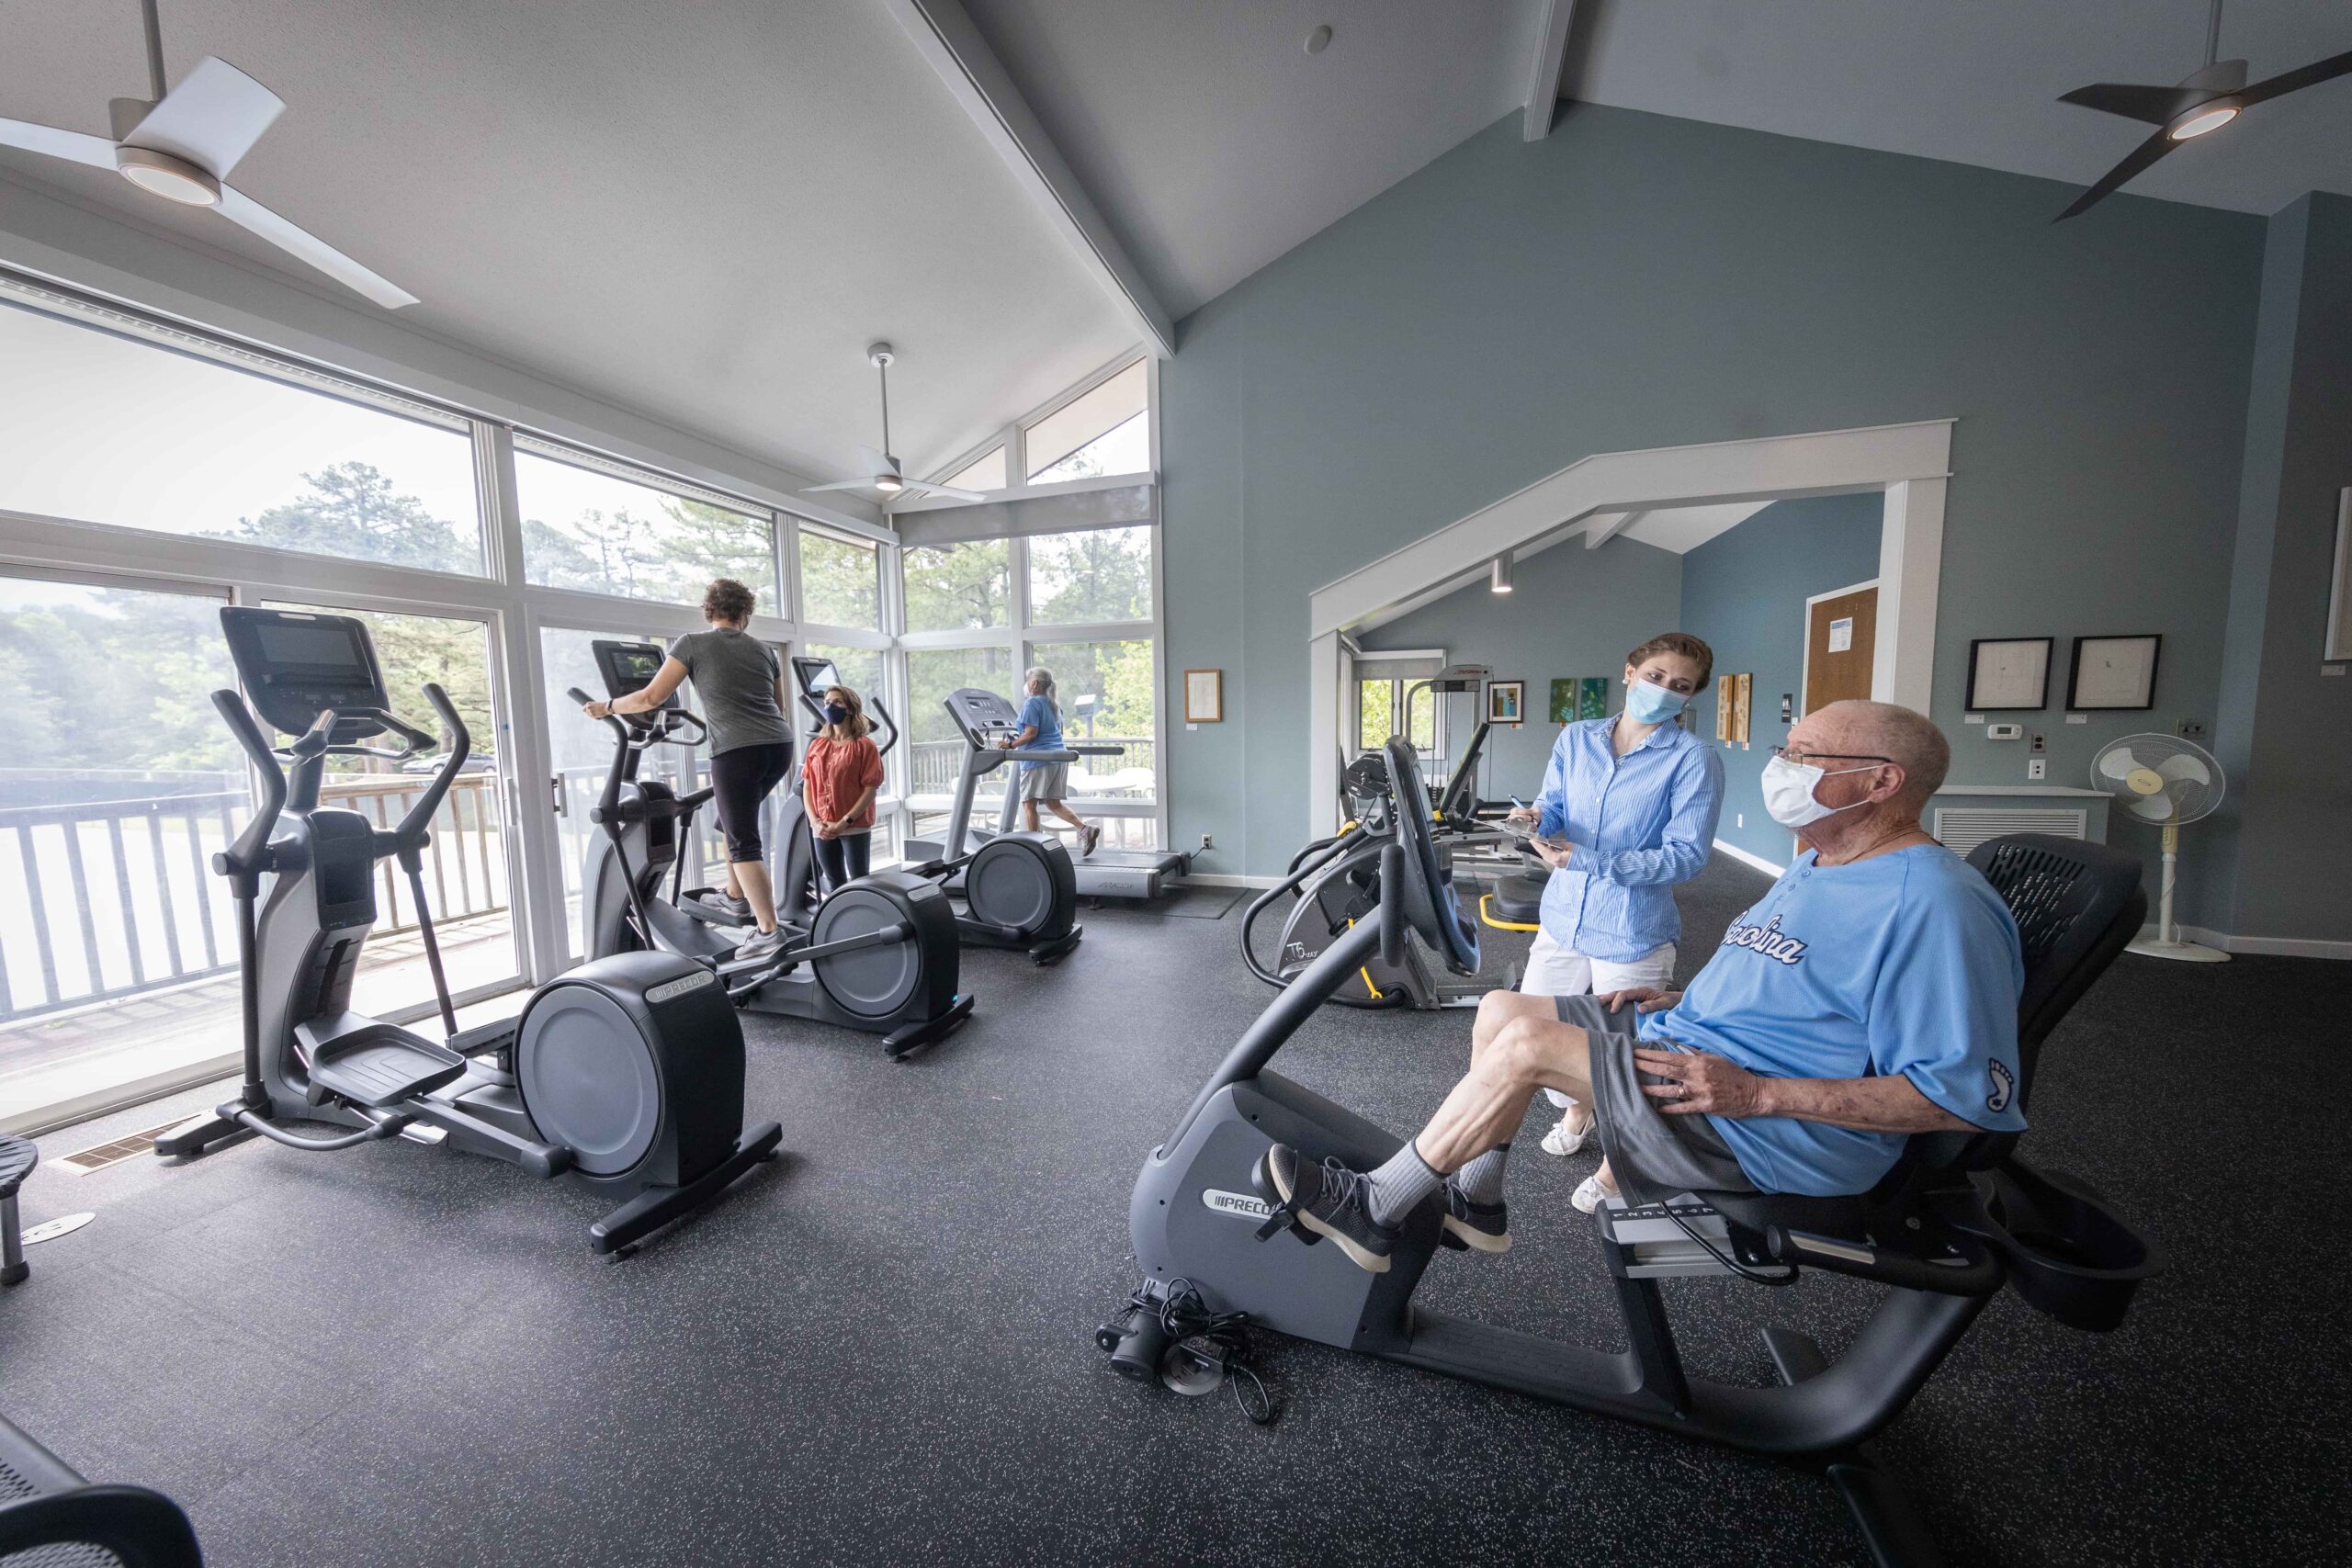 Elliptical machines and a recumbent bicycle